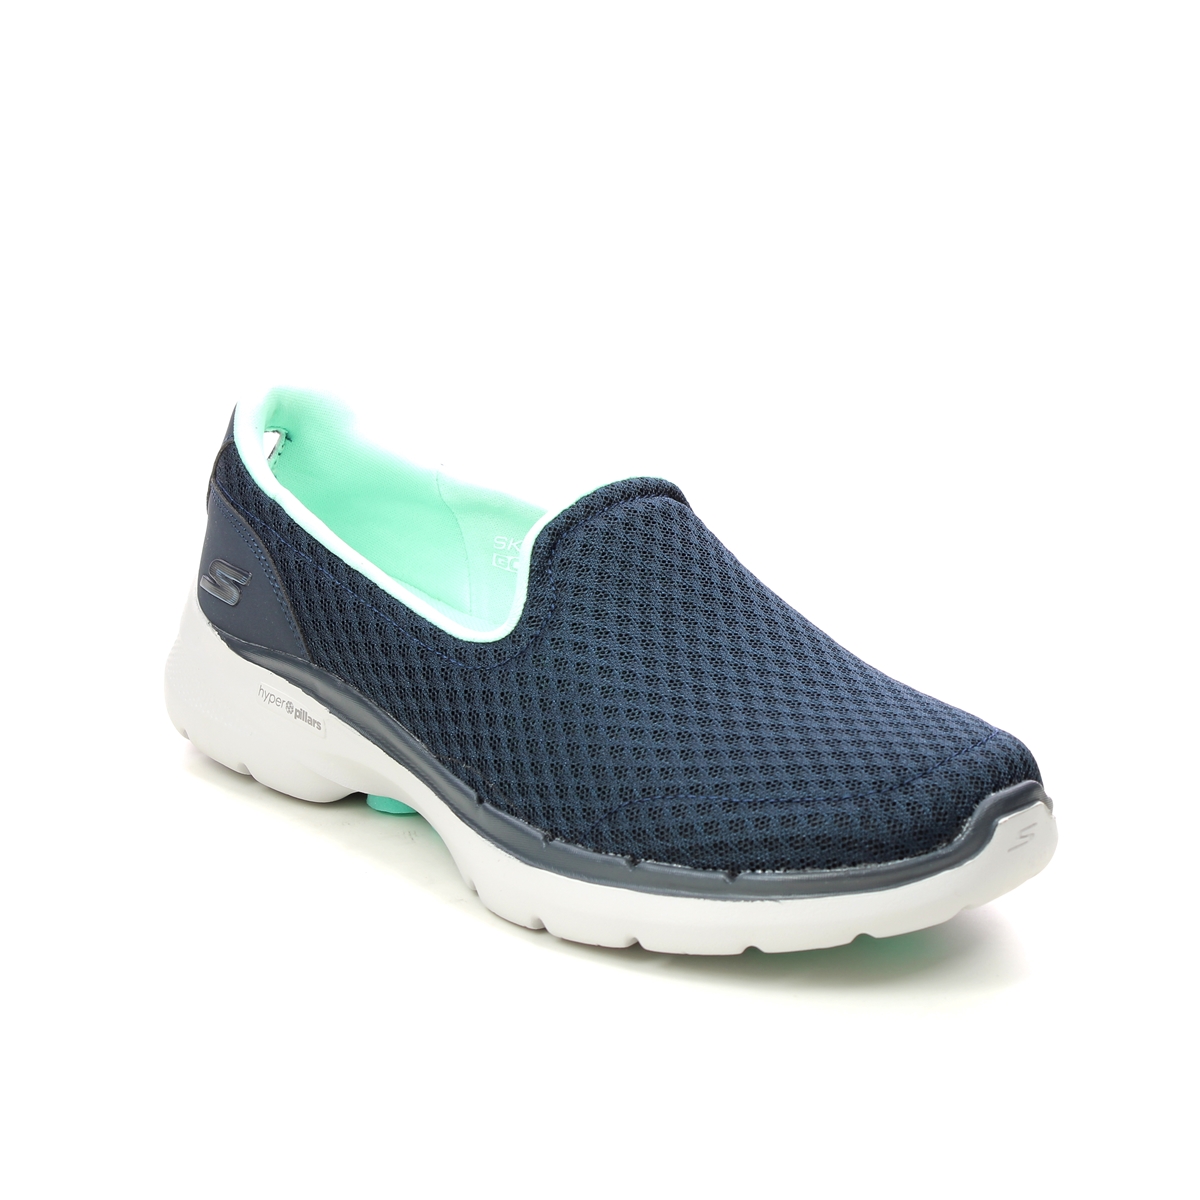 Skechers Go Walk 6 Navy Turquoise Womens Trainers 124508 In Size 8 In Plain Navy Turquoise